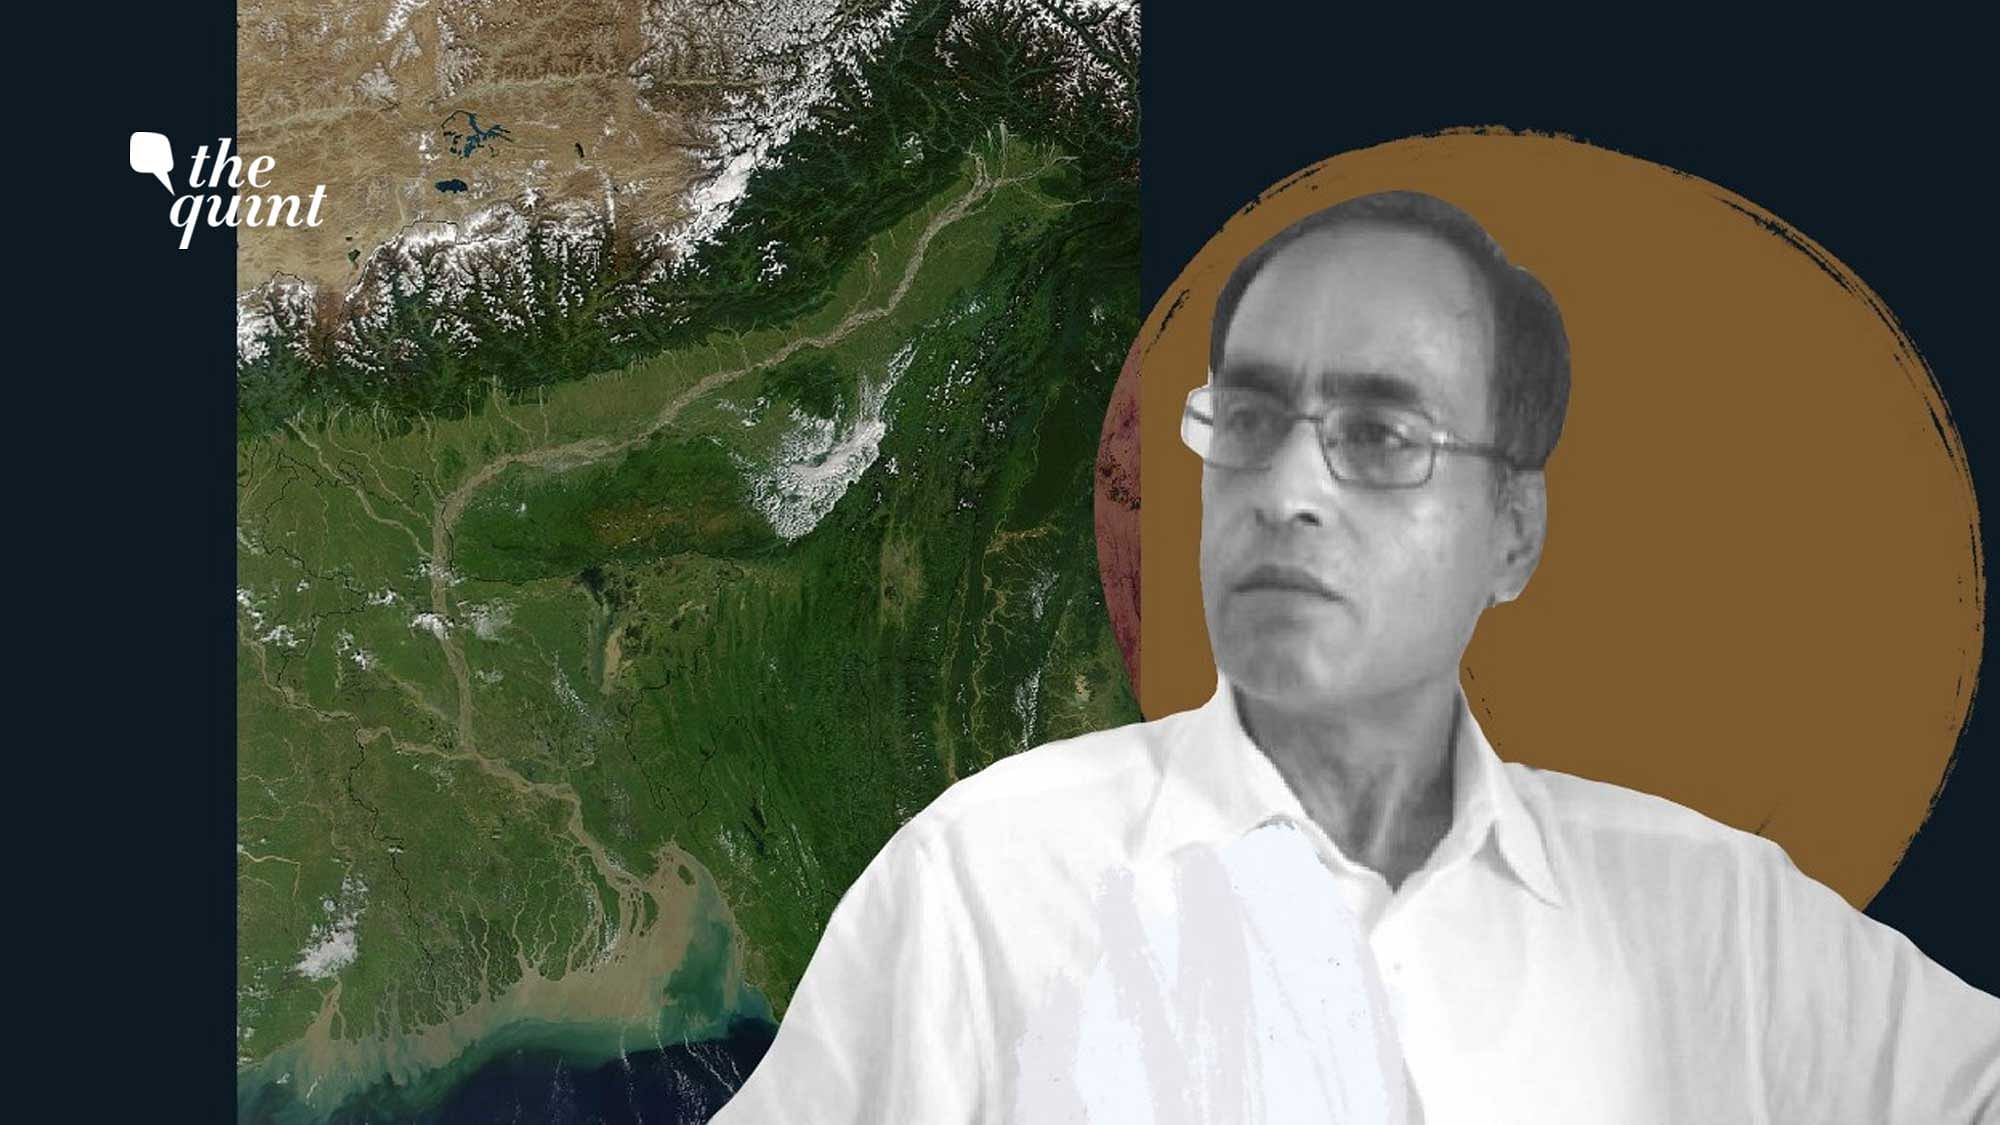 MLA Sherman Ali Ahmed (in photo) caused a stir by proposing a ‘Miya museum’, for the Bengali-origin Muslims of Char-Charporis, Assam. Map of Brahmaputra river valley used for representational purposes.